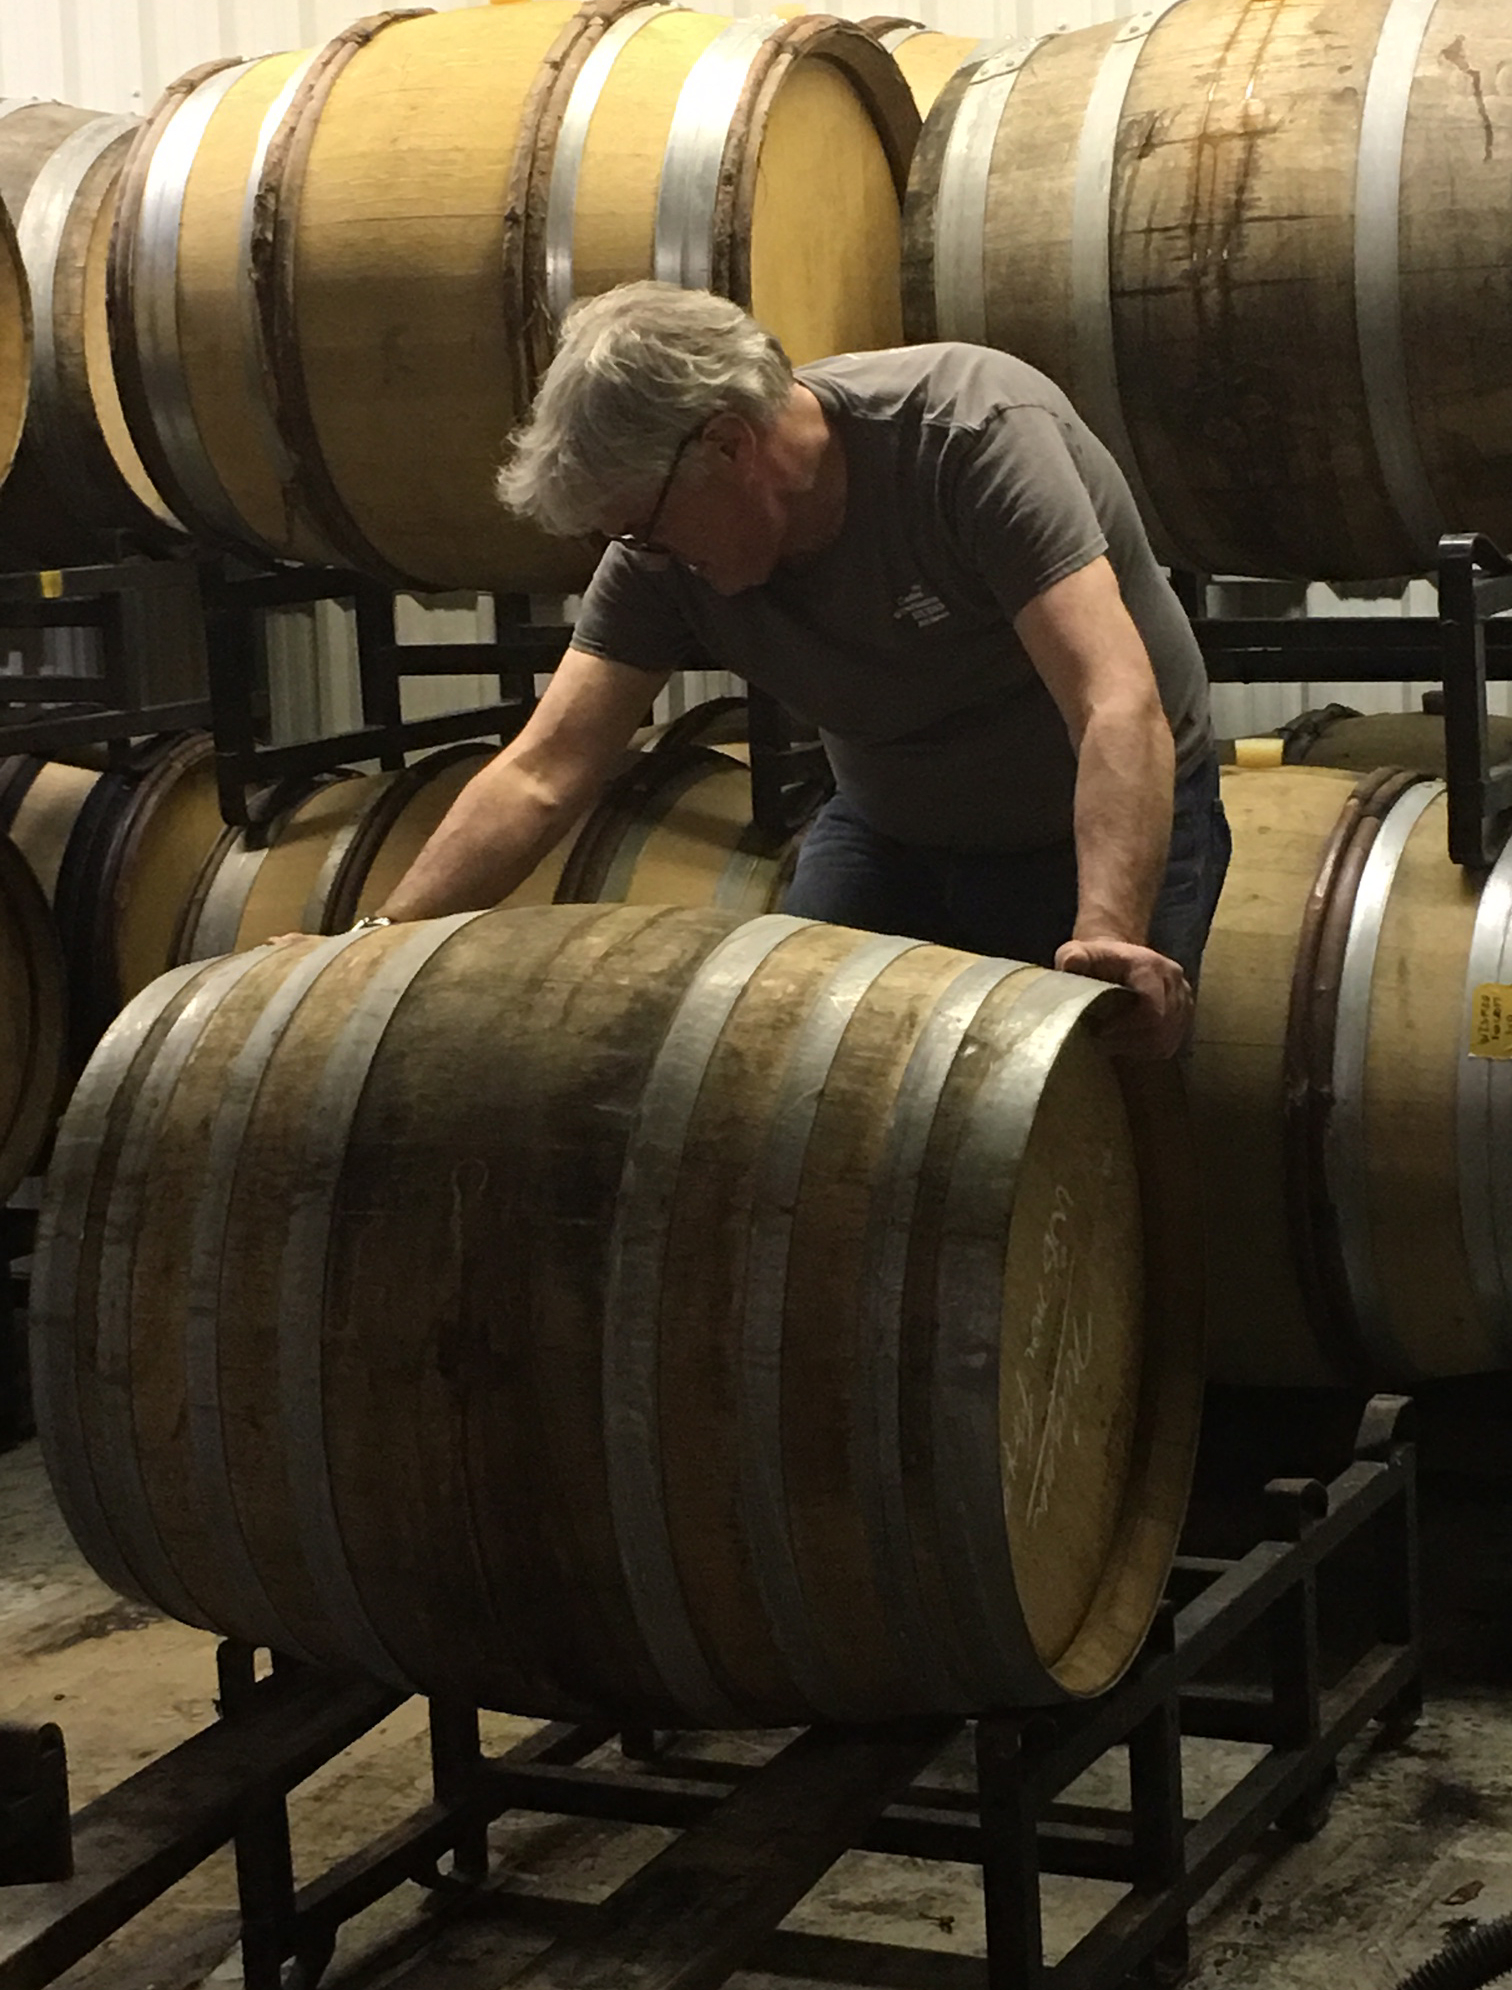 Thomas Bachelder and the Cuvée from the Heart